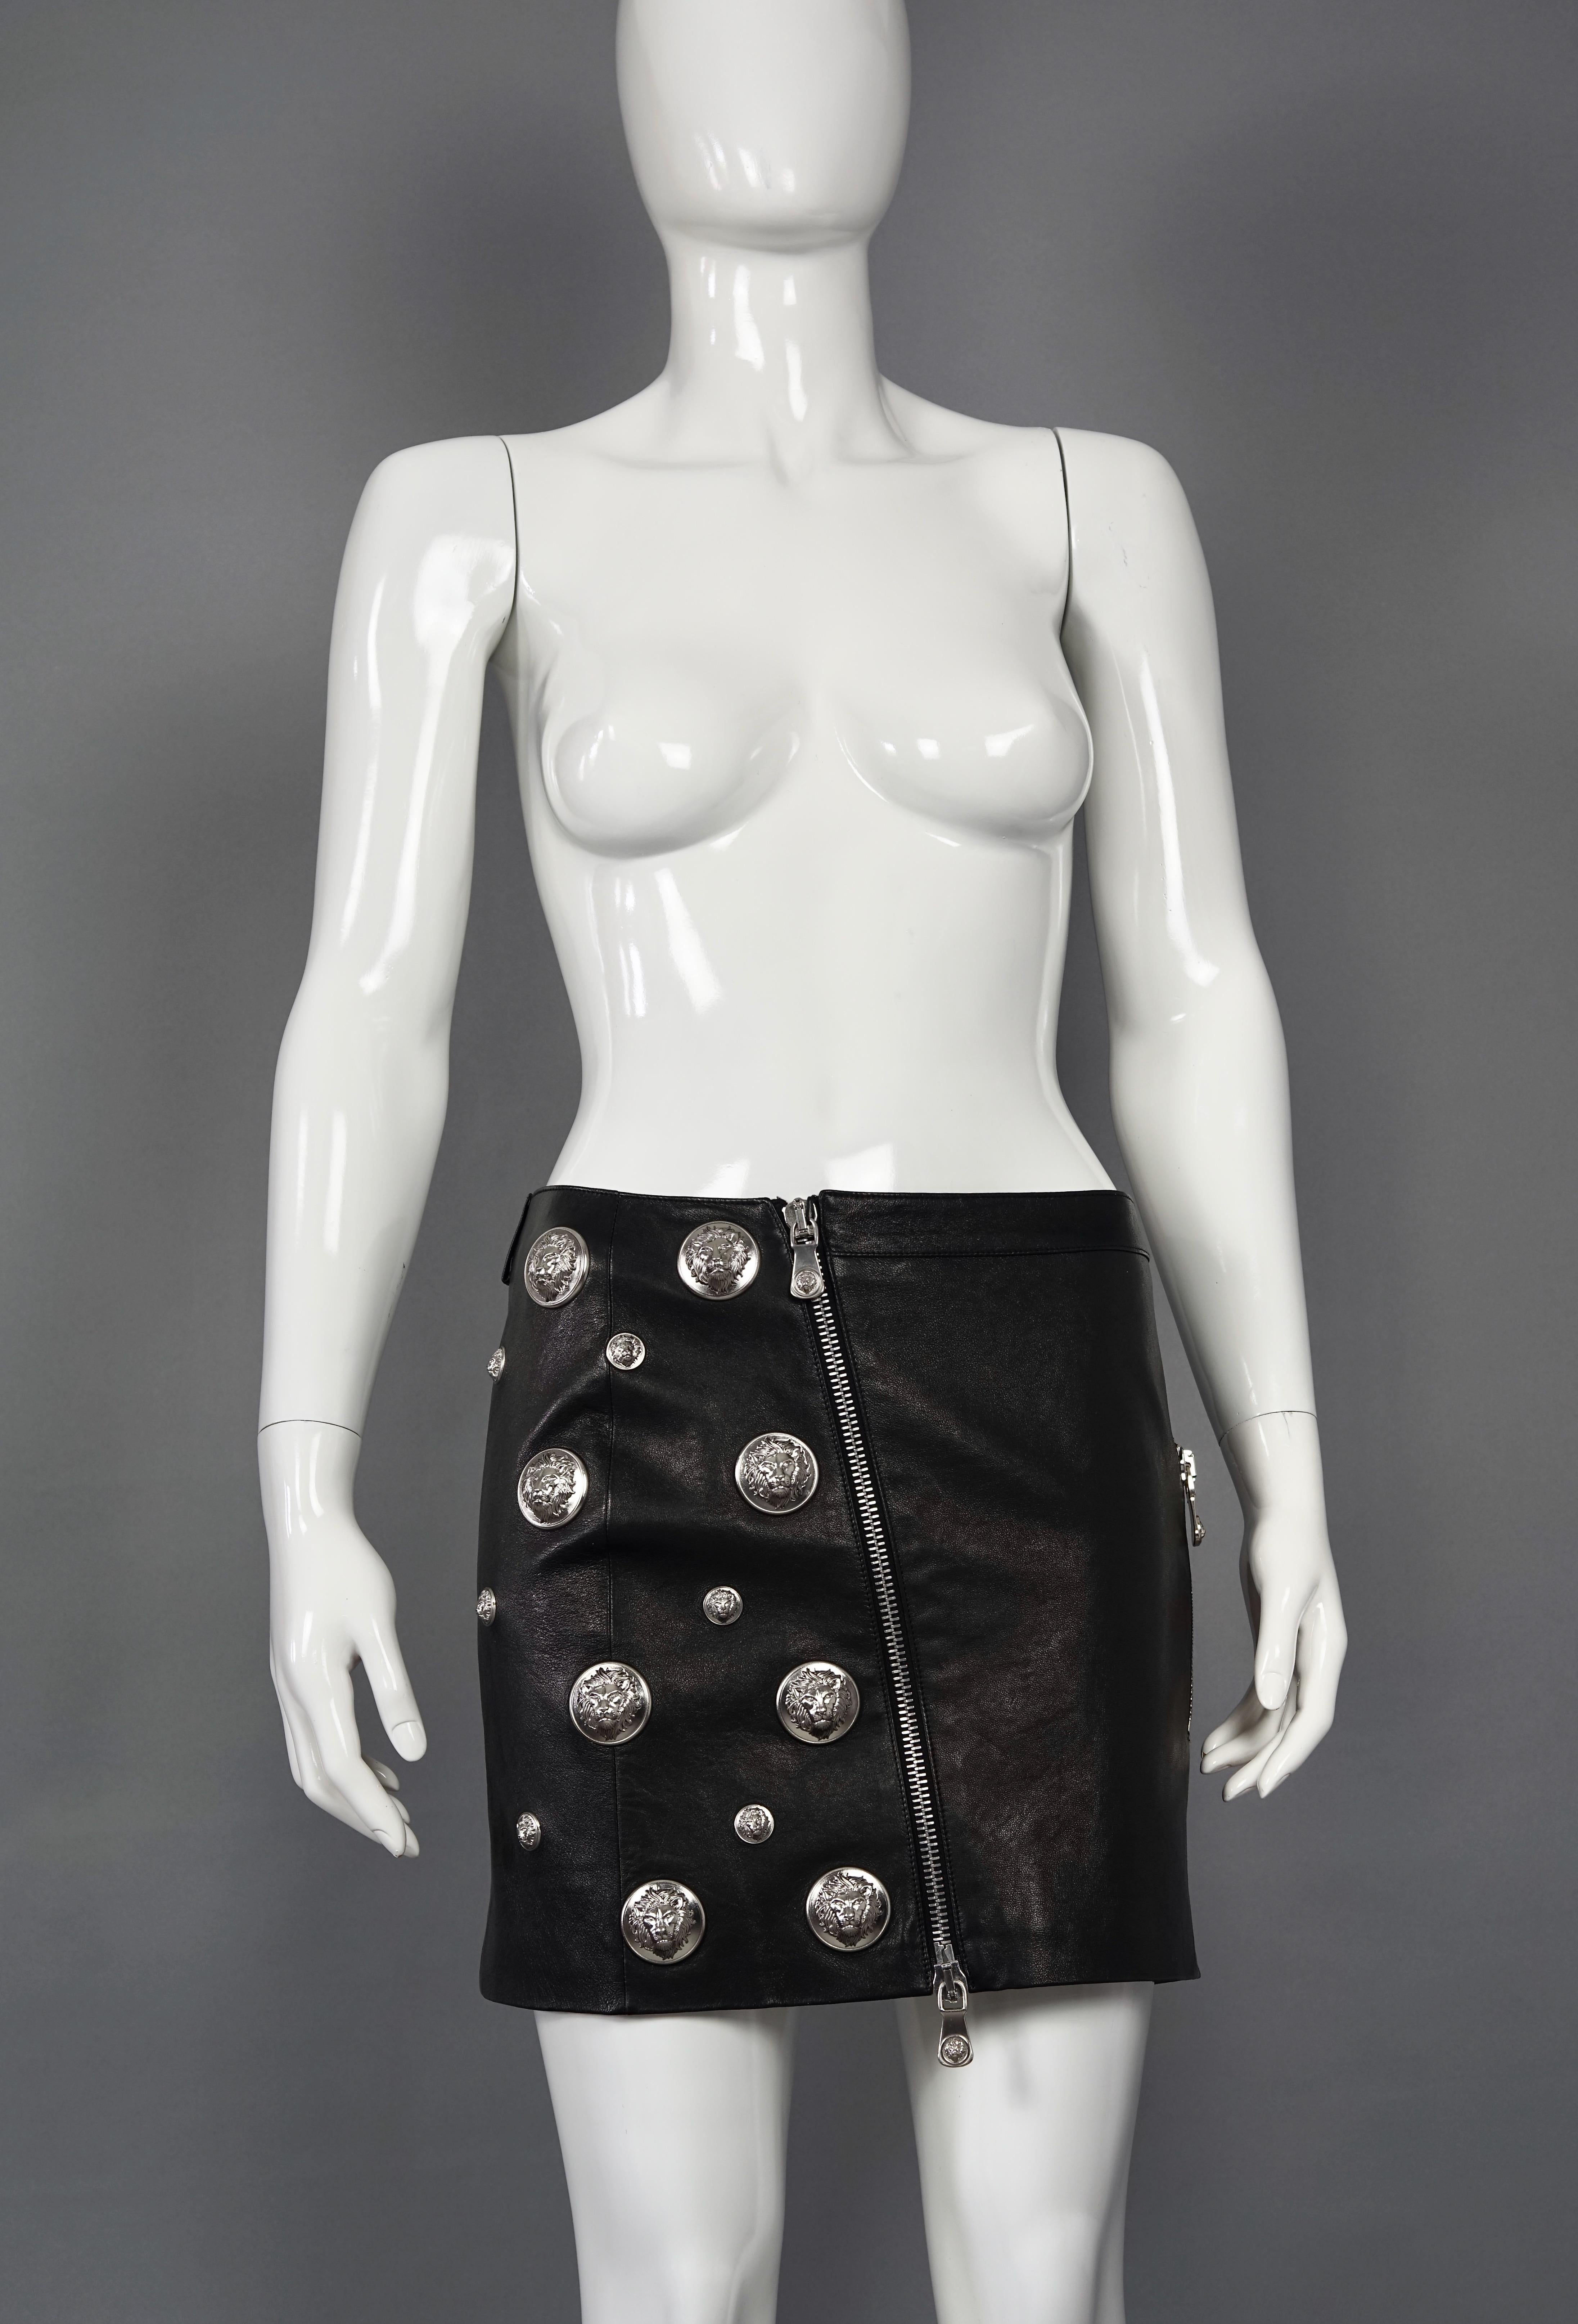 Vintage VERSACE Lion Head Black Leather Skirt

Measurements taken laid flat, please double waist and hips:
Waist: 14.96 inches (38 cm)
Hips: 17.32 inches (44 cm)
Length: 14.56 inches (37 cm)

Features:
- 100% Authentic VERSACE VERSUS.
- Black